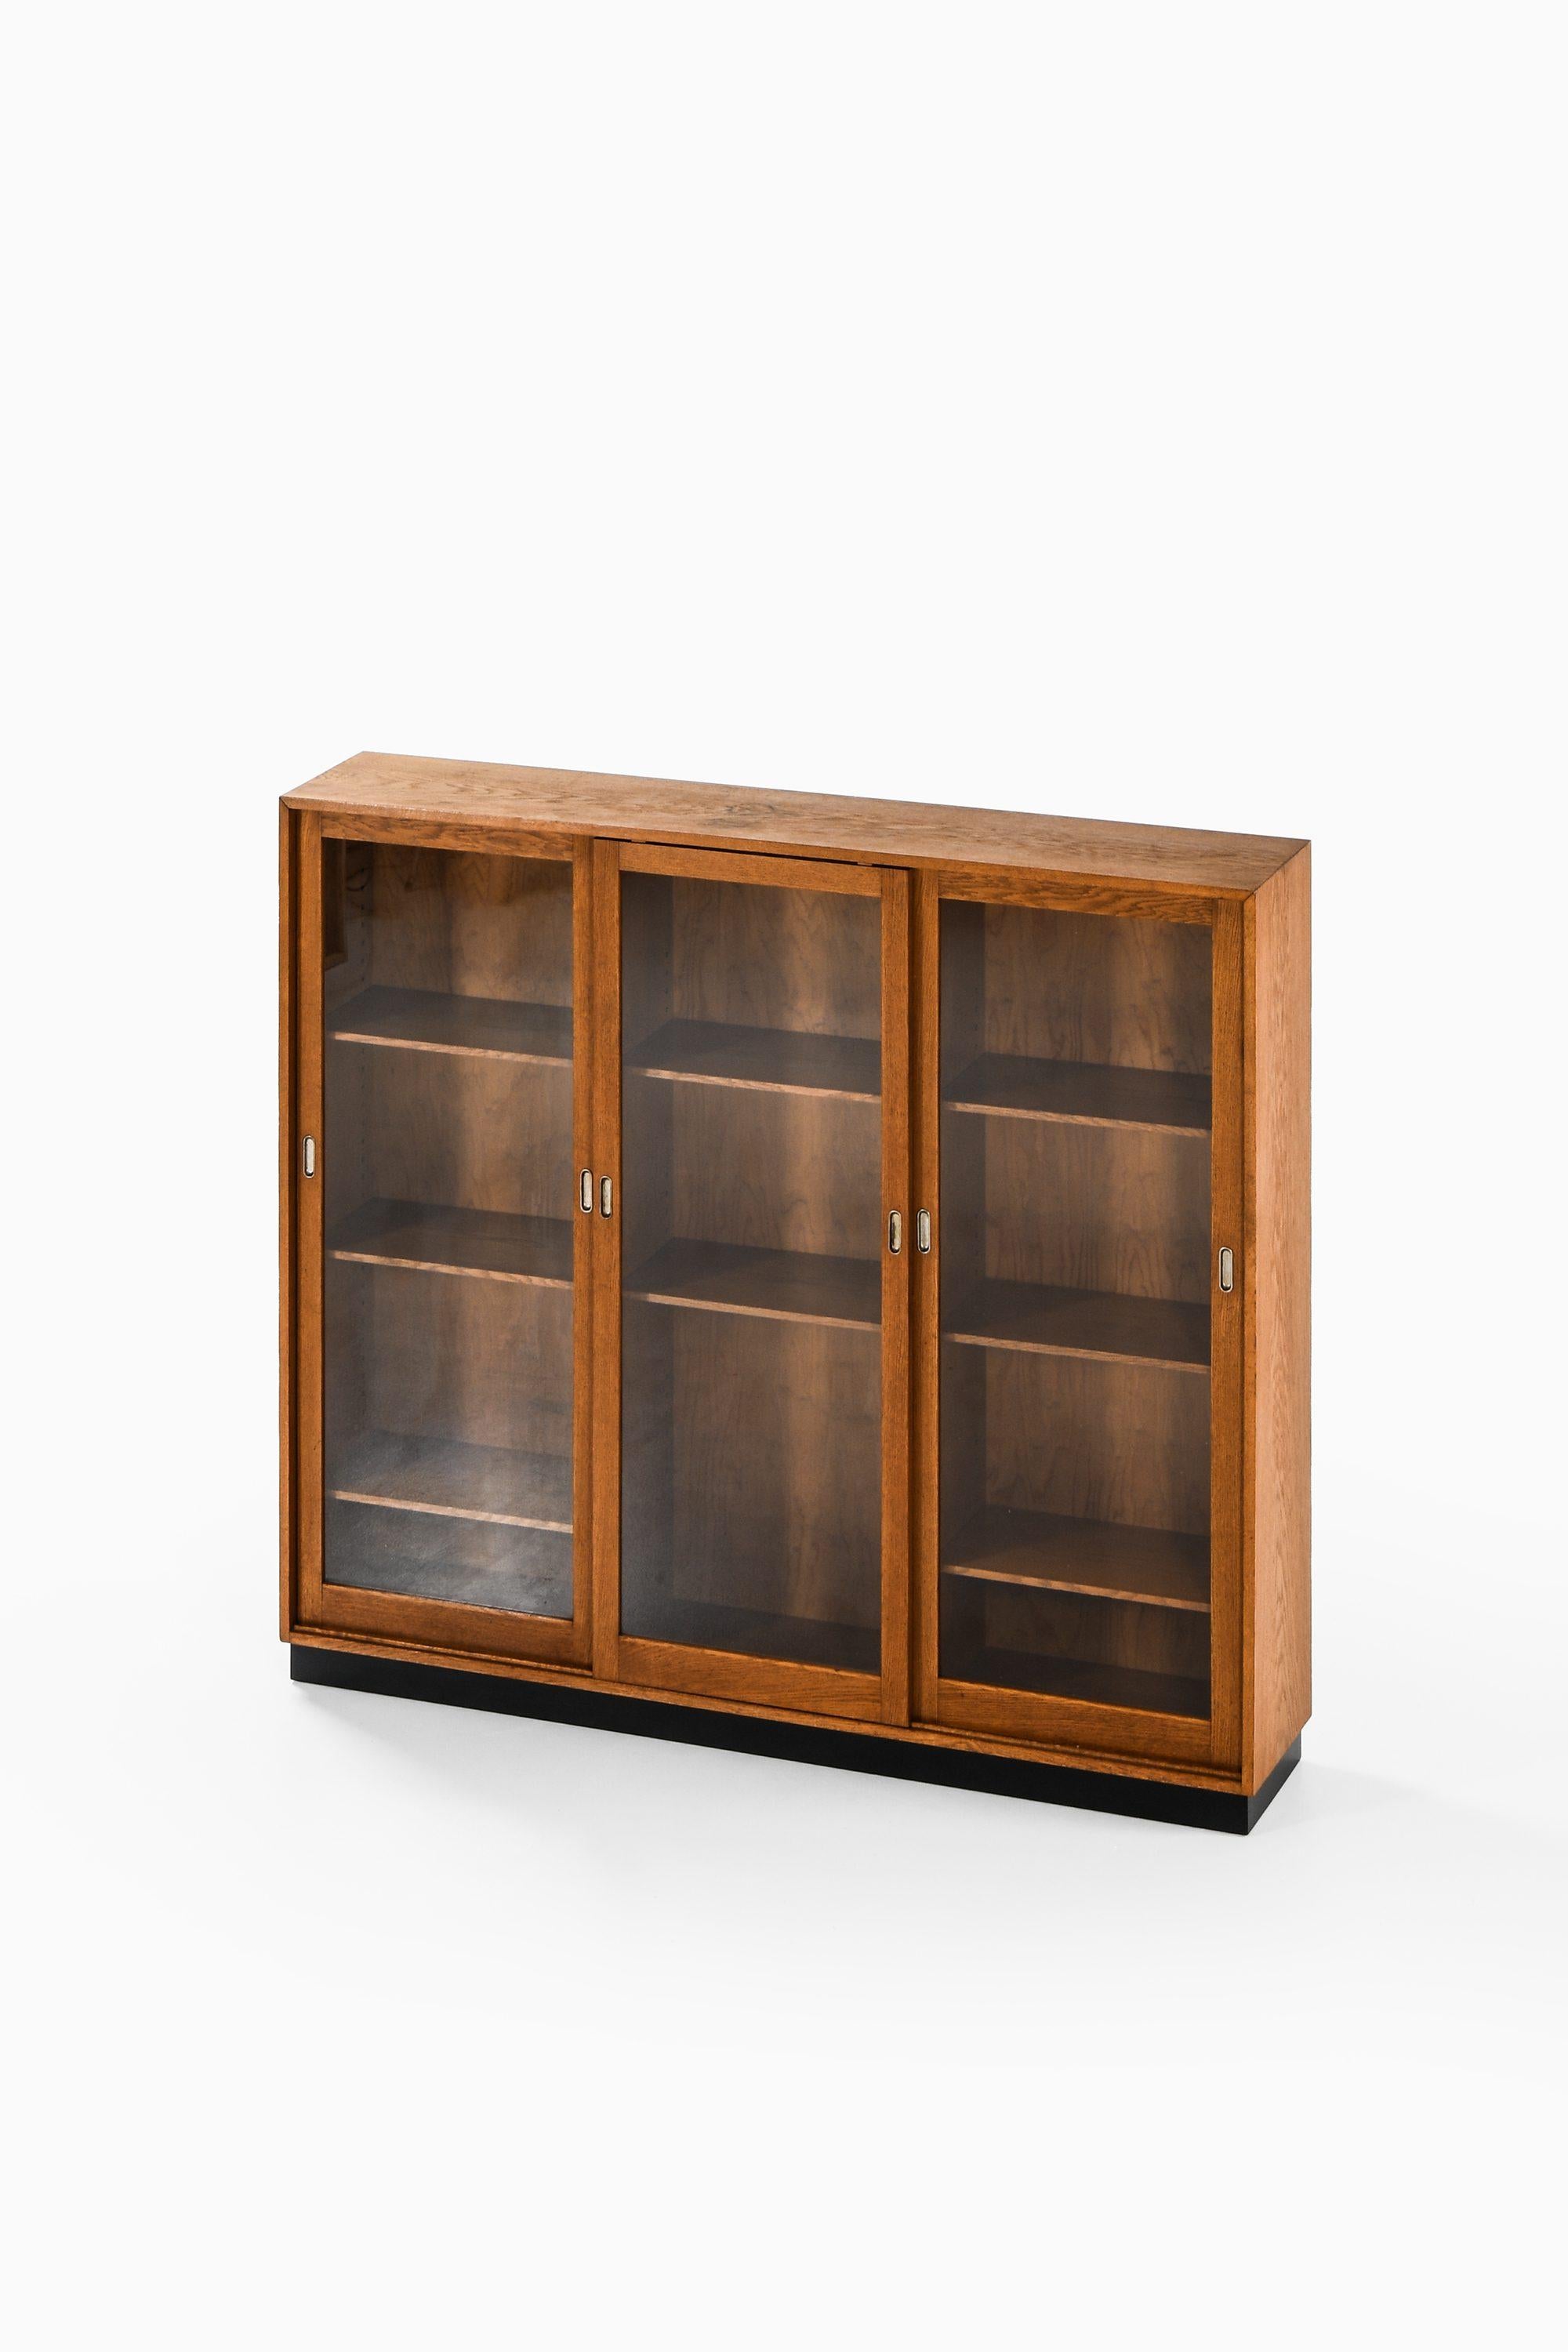 Scandinavian Modern Large Display Cabinet in Oak, Pine and Metal, 1940’s For Sale